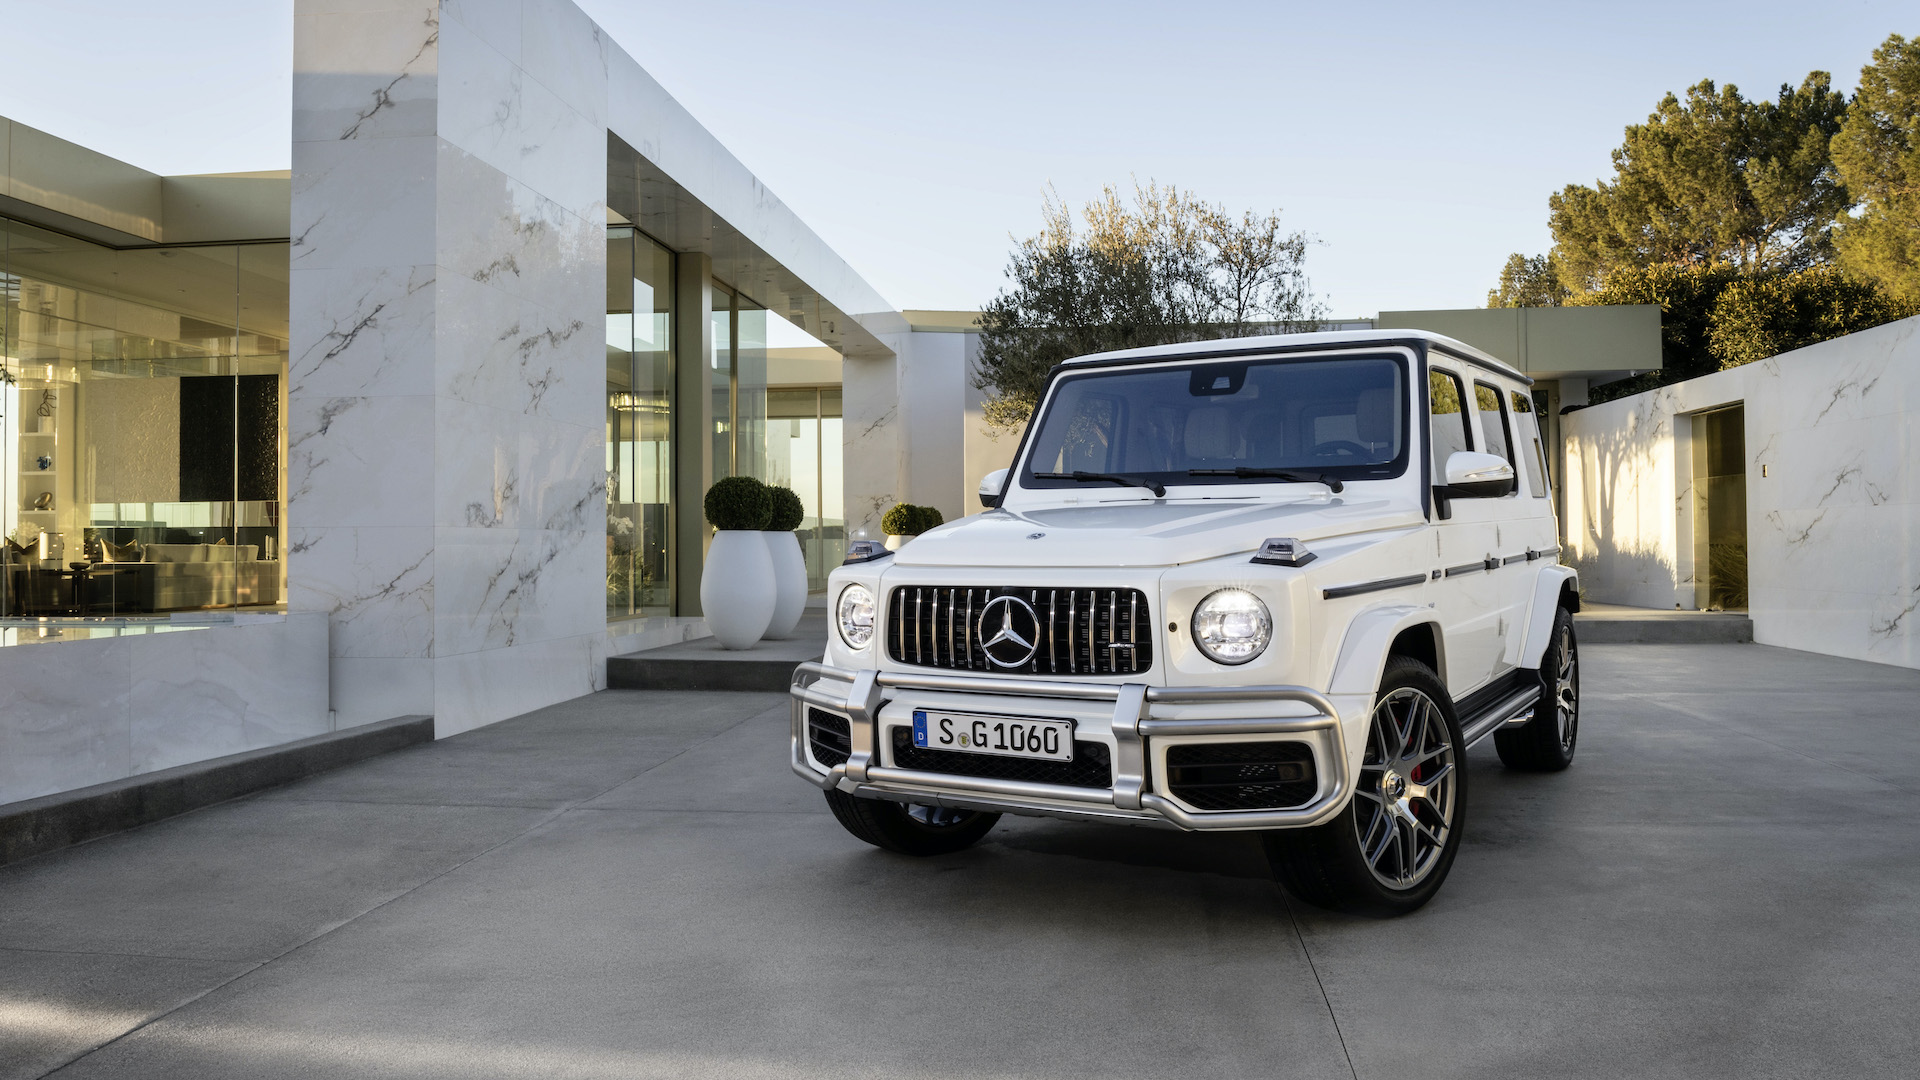 Virgil Abloh x Mercedes: the G-Class project is here